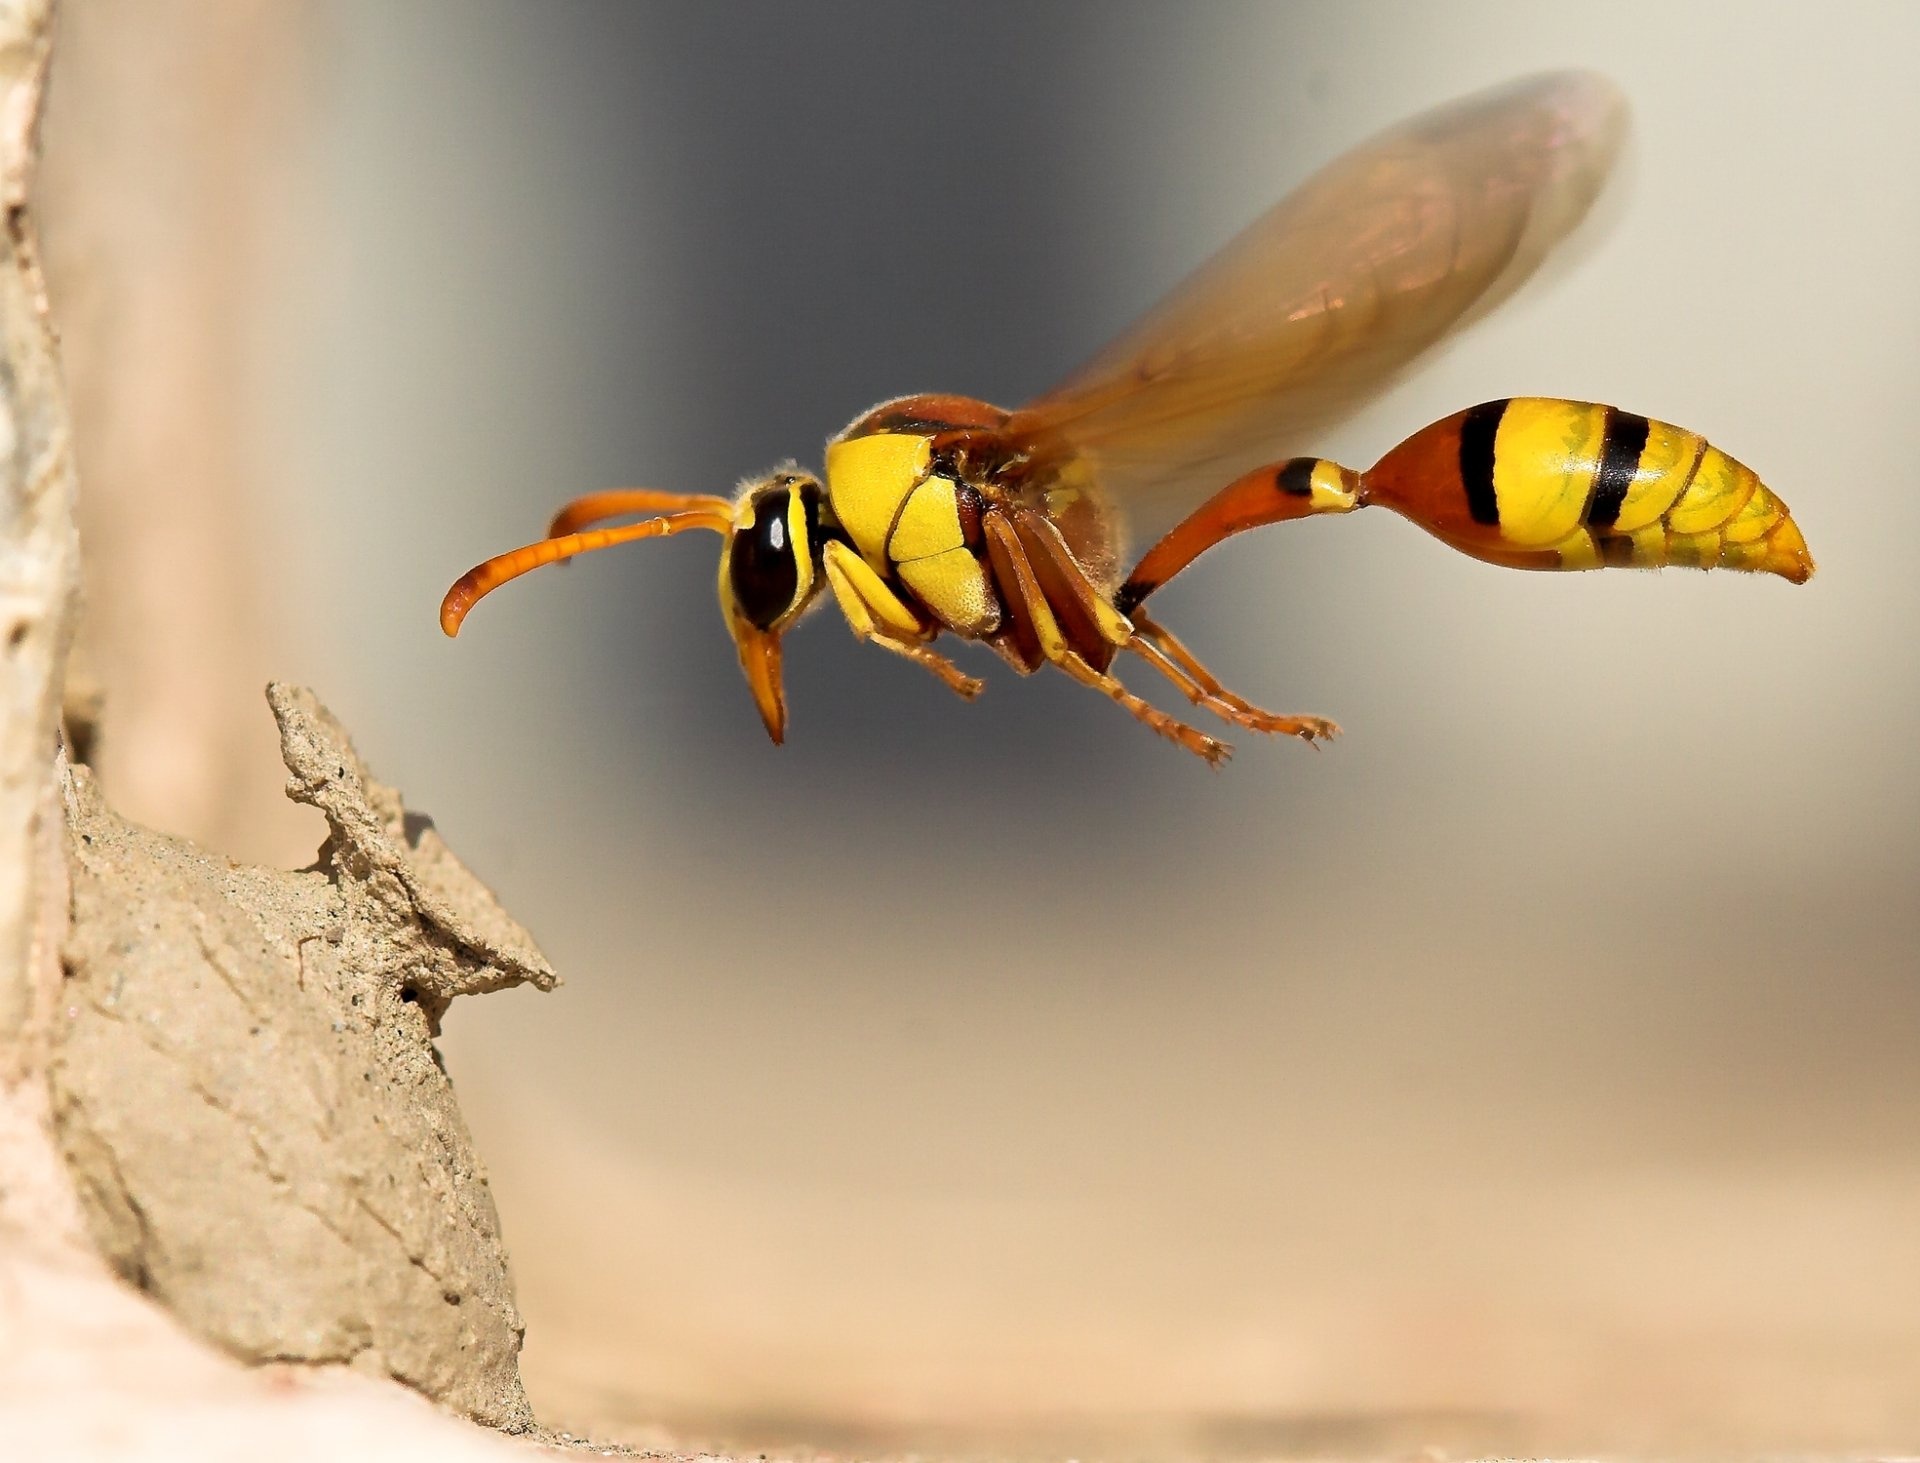 Wasp wallpapers, Insect beauty, Nature's tiny warriors, 4K resolution, 1920x1470 HD Desktop